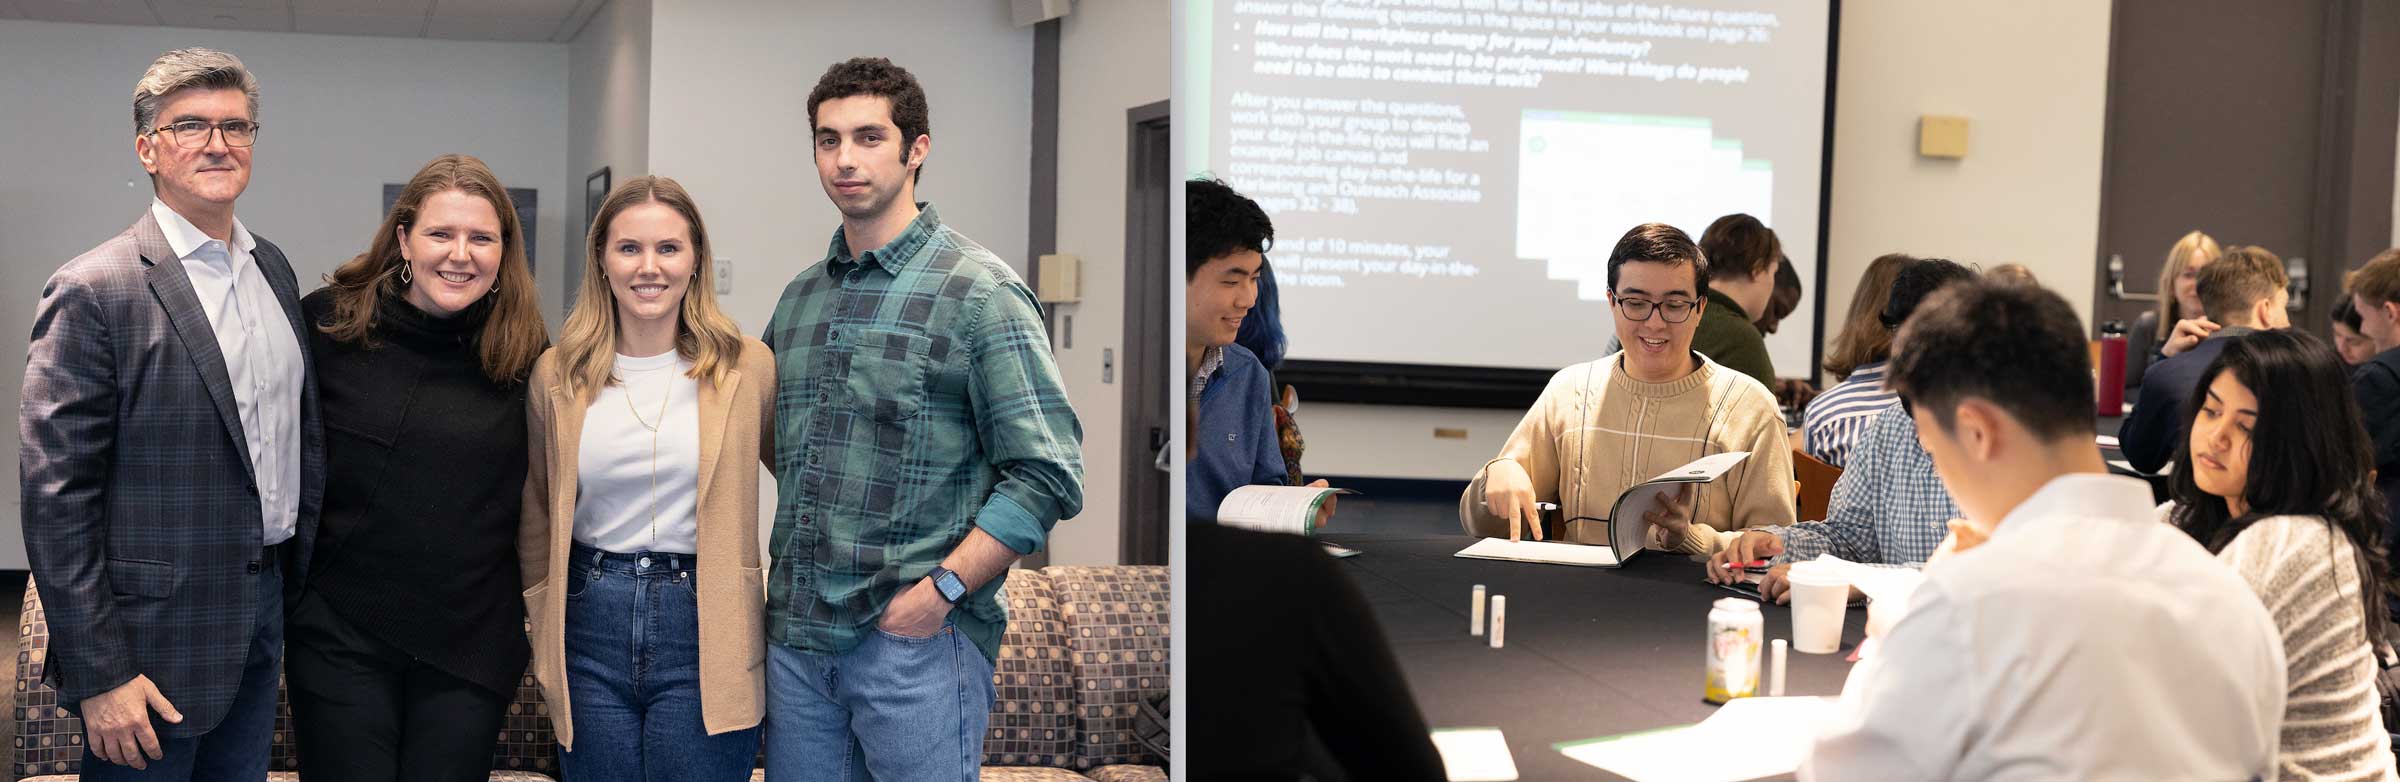 two photos side by side. left: four people standing an posing for the photo. right: people seated at a table listening so someone talk while turning a page in a book.